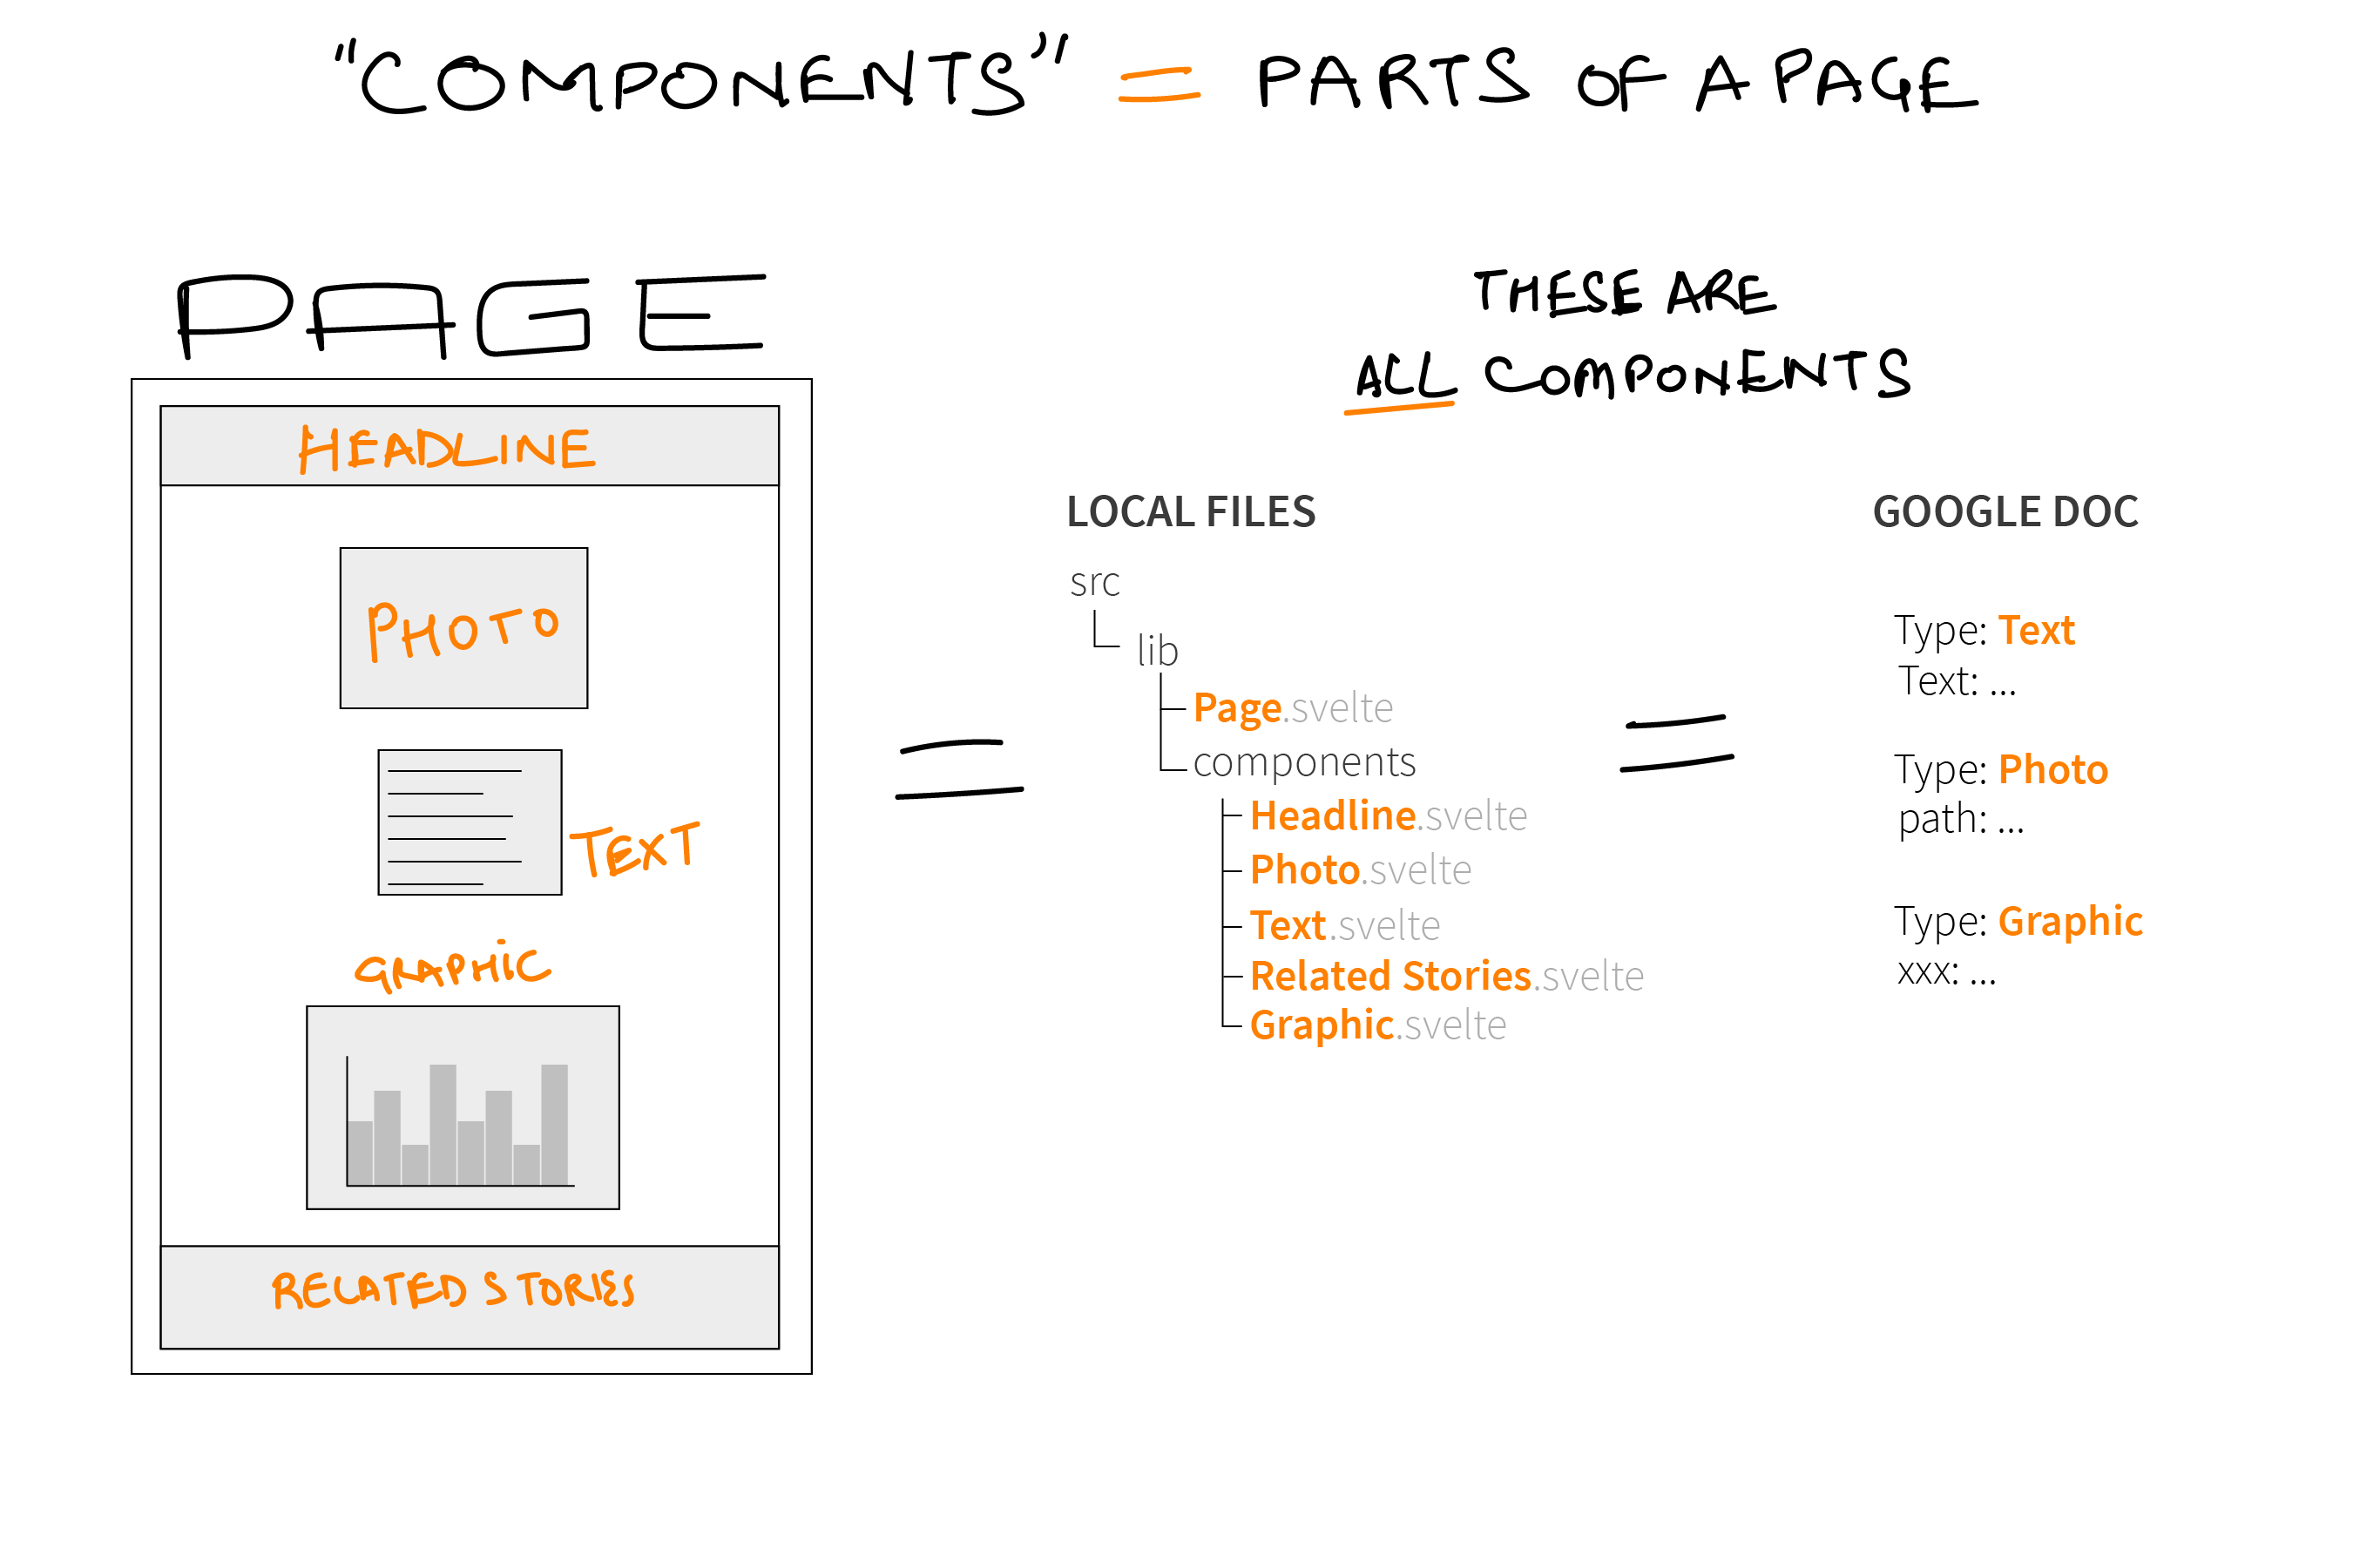 Components are parts of a page